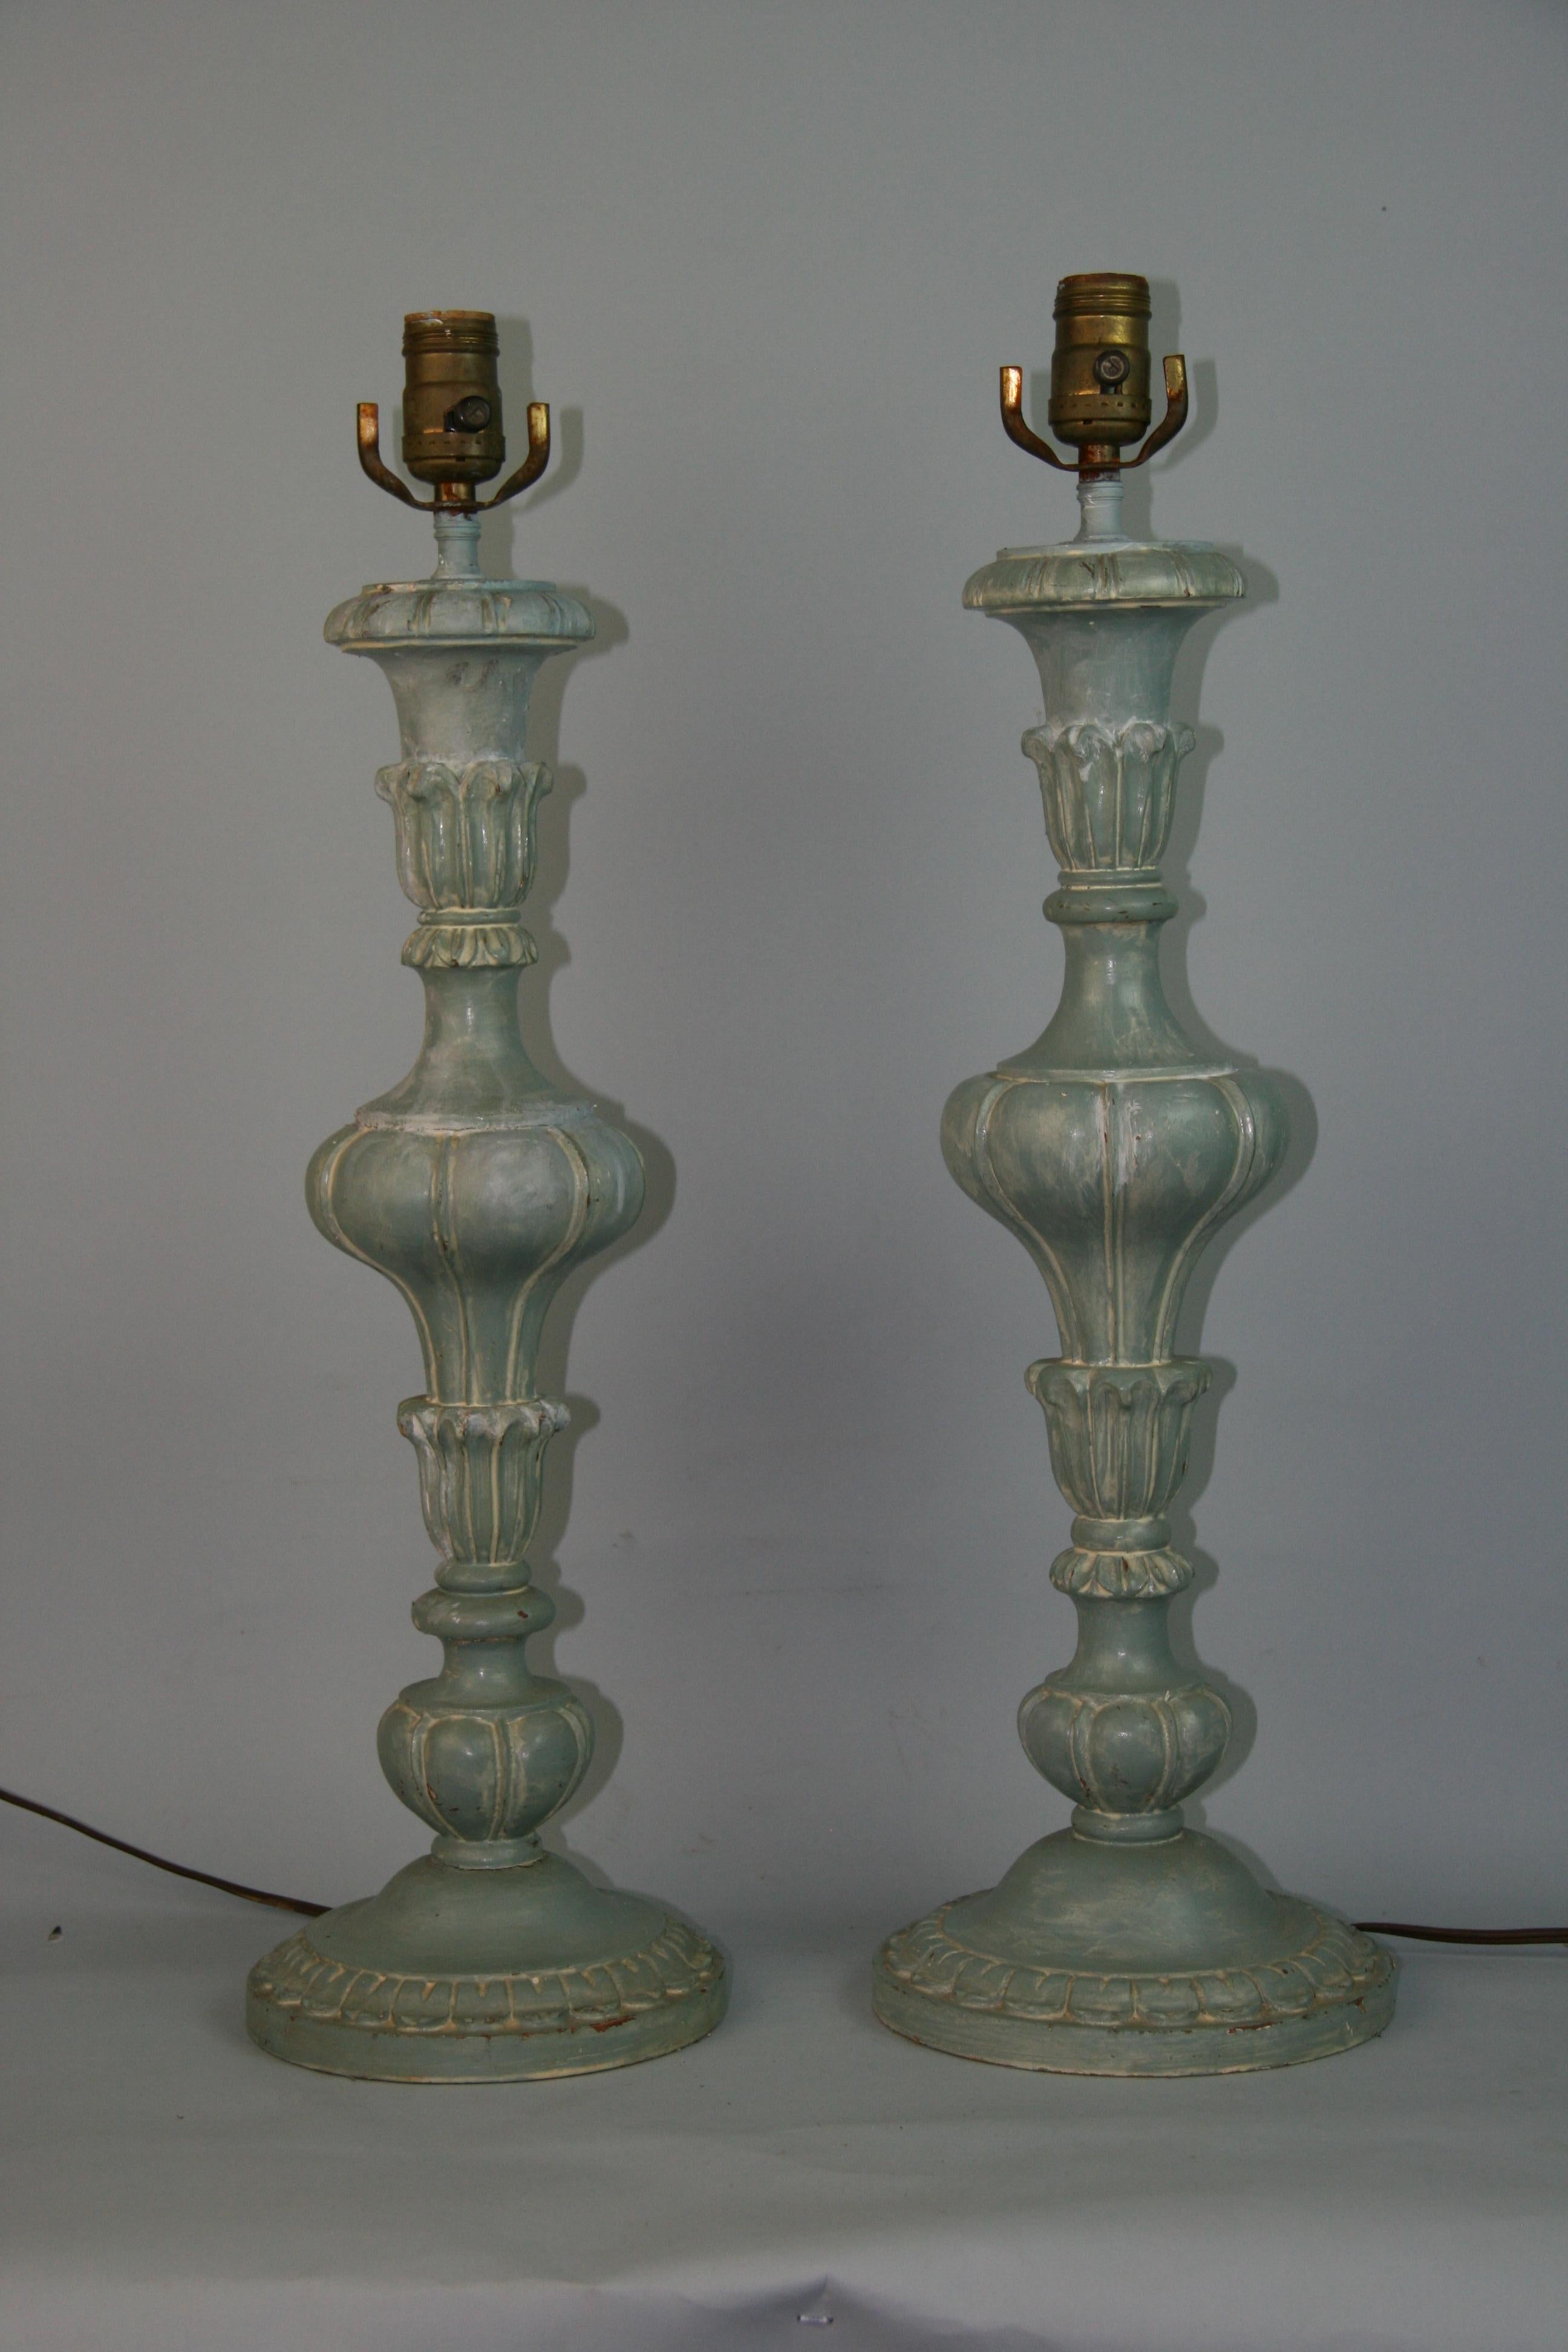 1305 pair carved wood French lamps
Measure: Height to top of socket 23.5